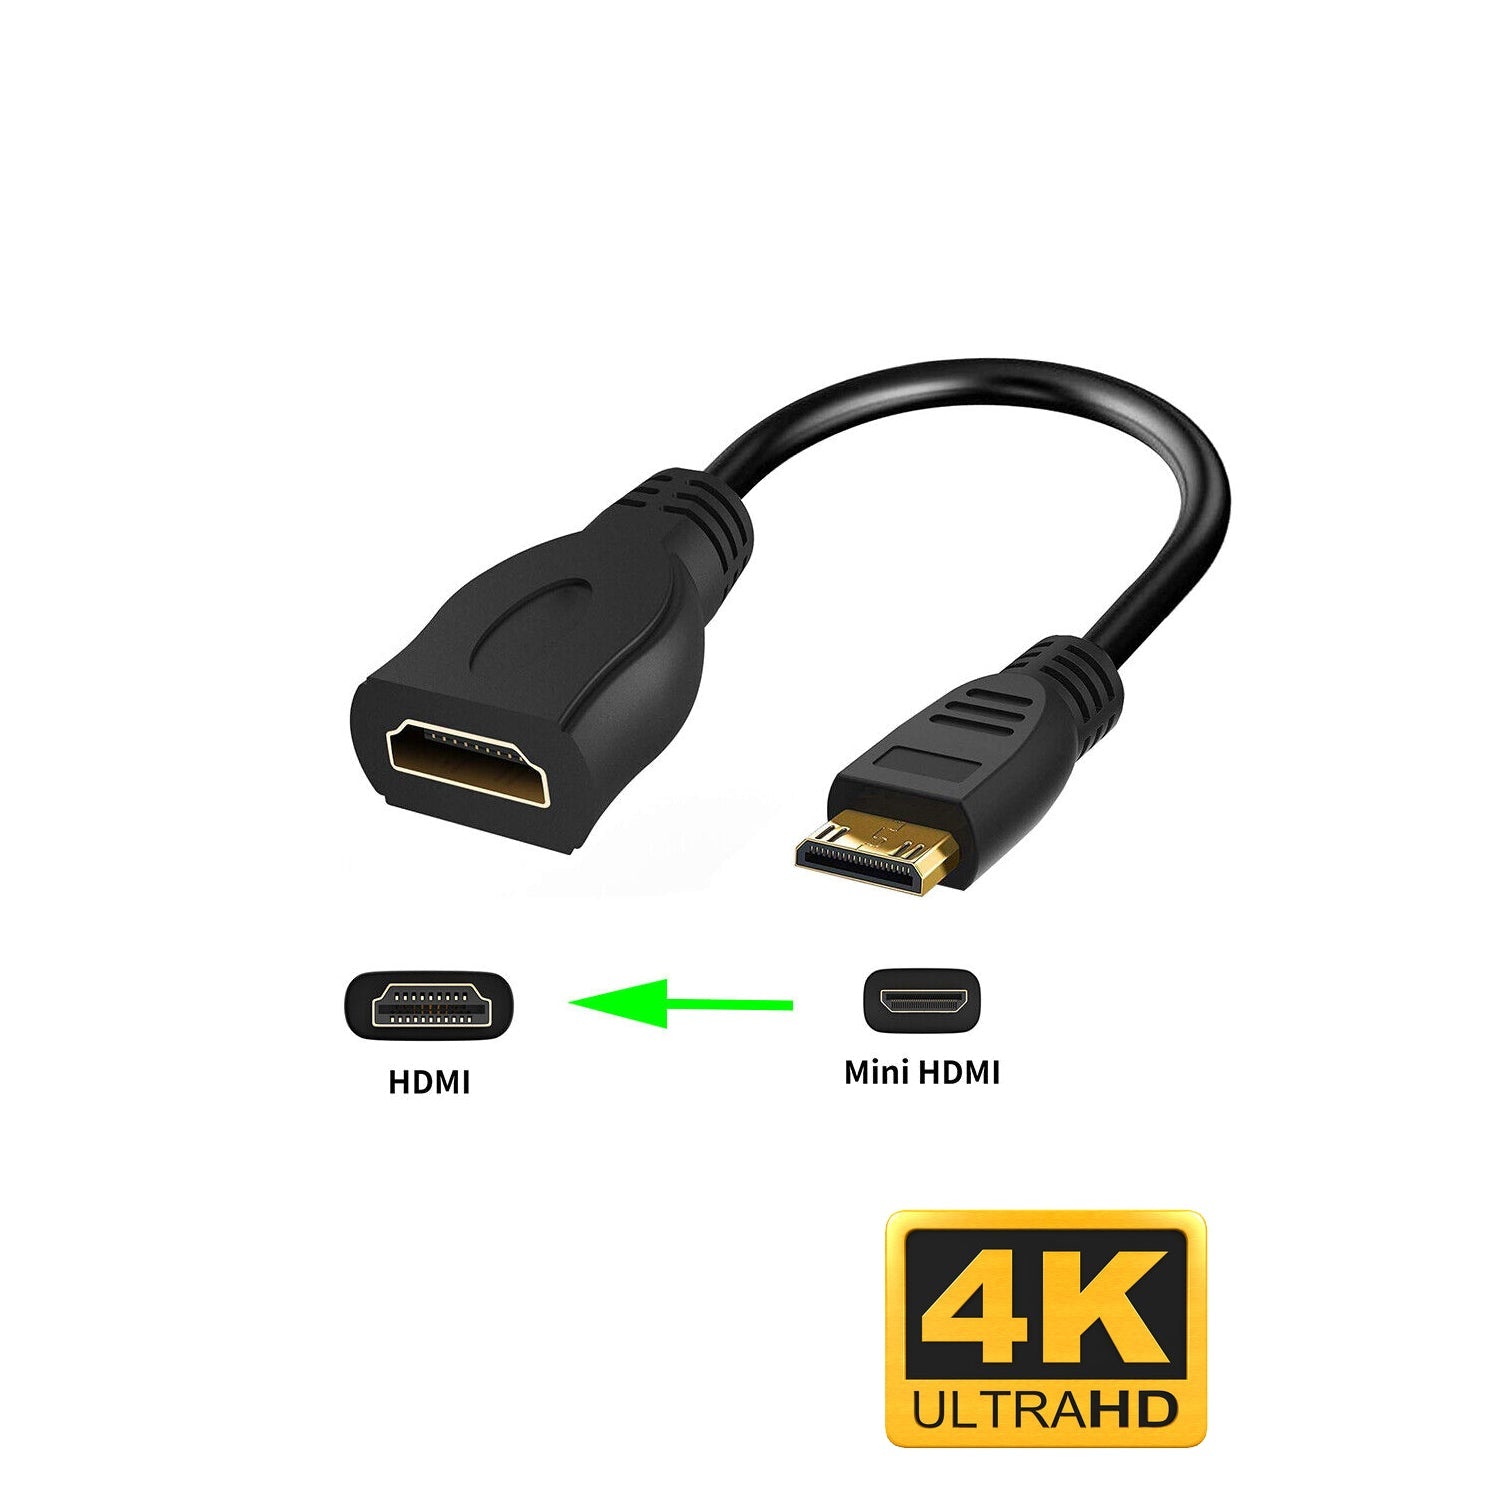 HDMI Mini to HDMI Cable Adapter (for KTV Touch) - Karaoke Home Entertainment